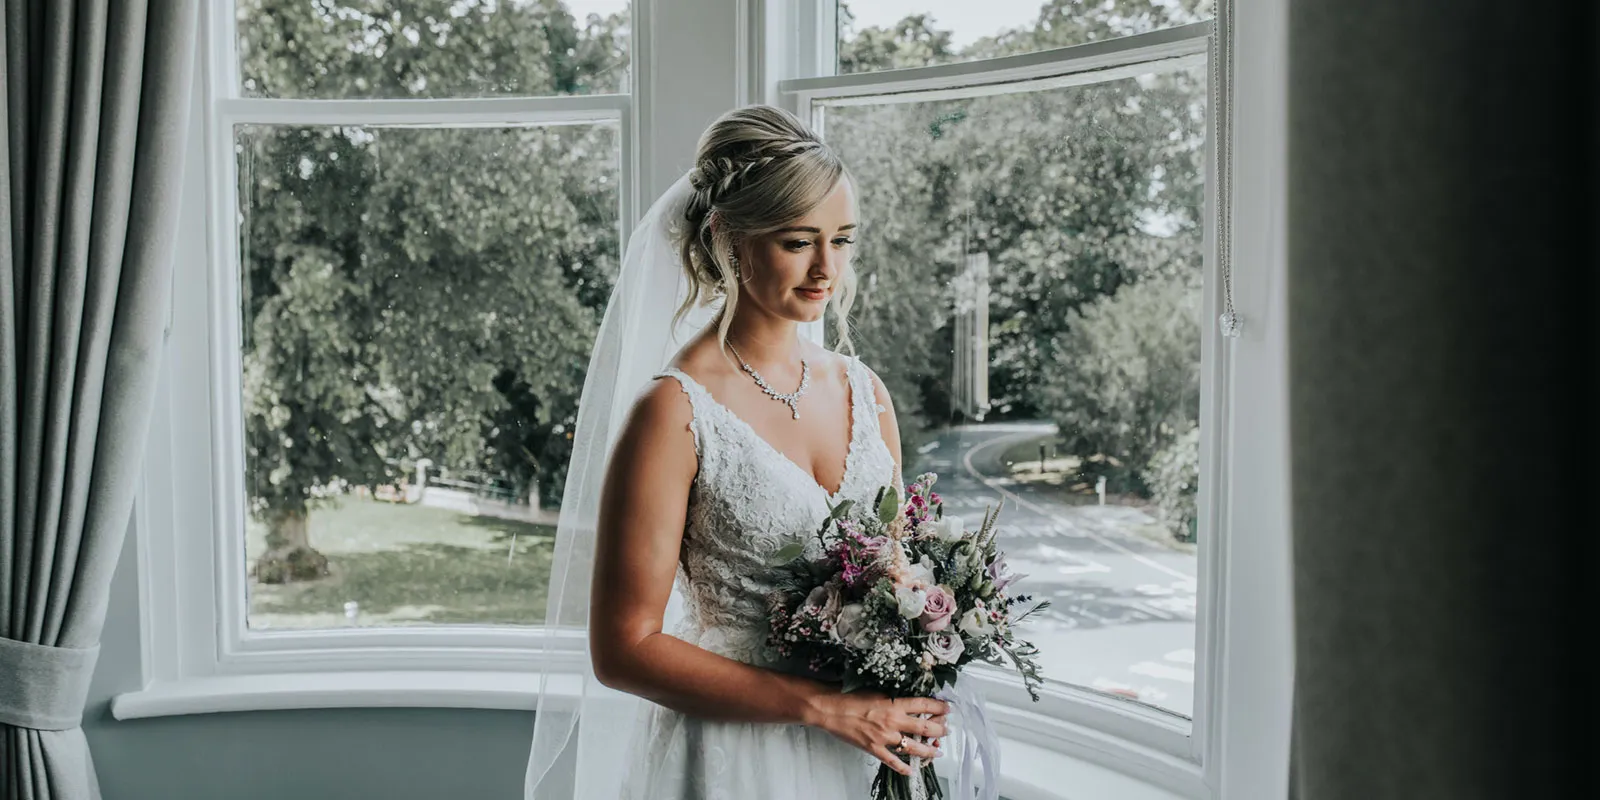 Bride in window with bouquet